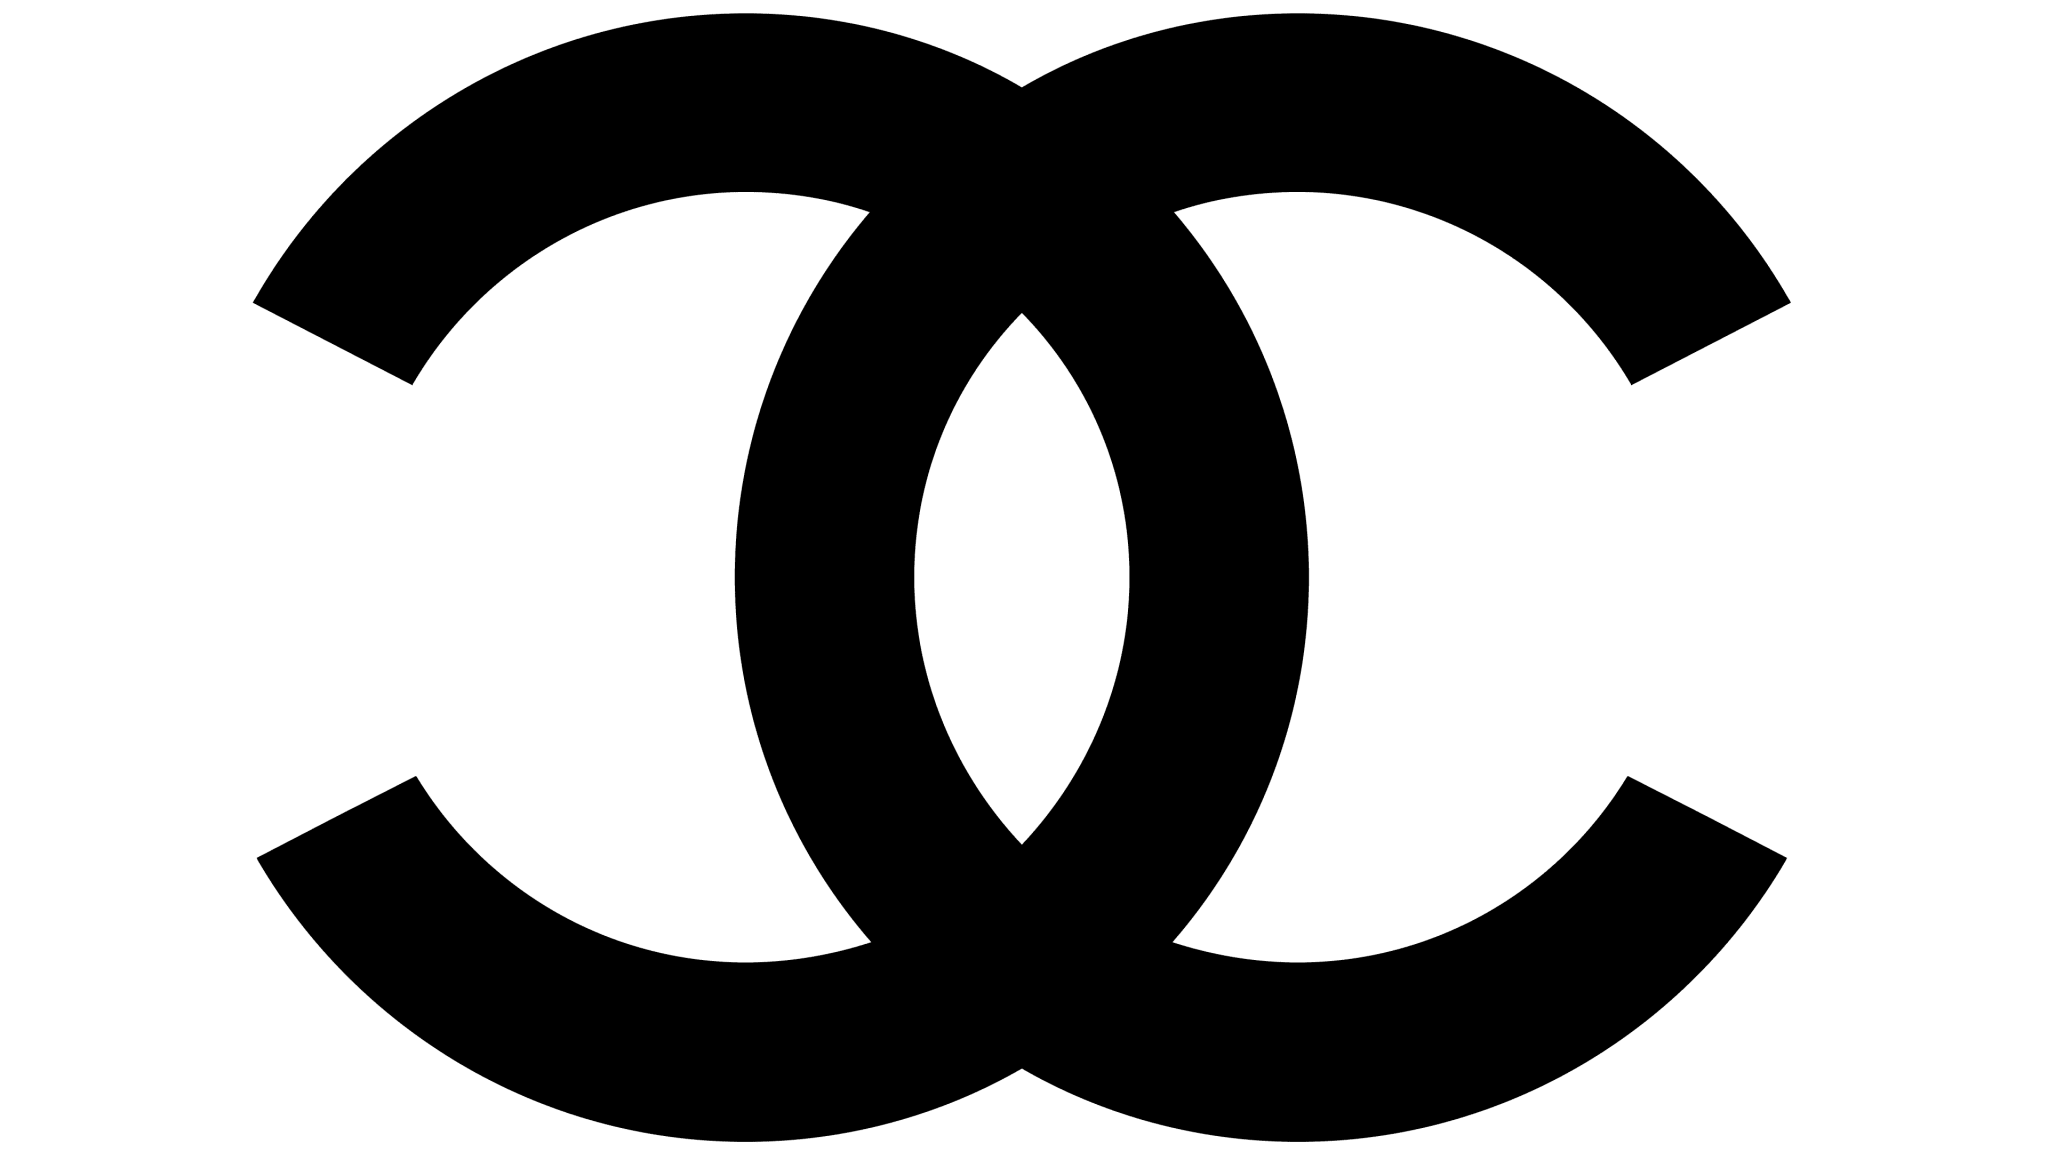 Chanel Logo and symbol meaning history sign